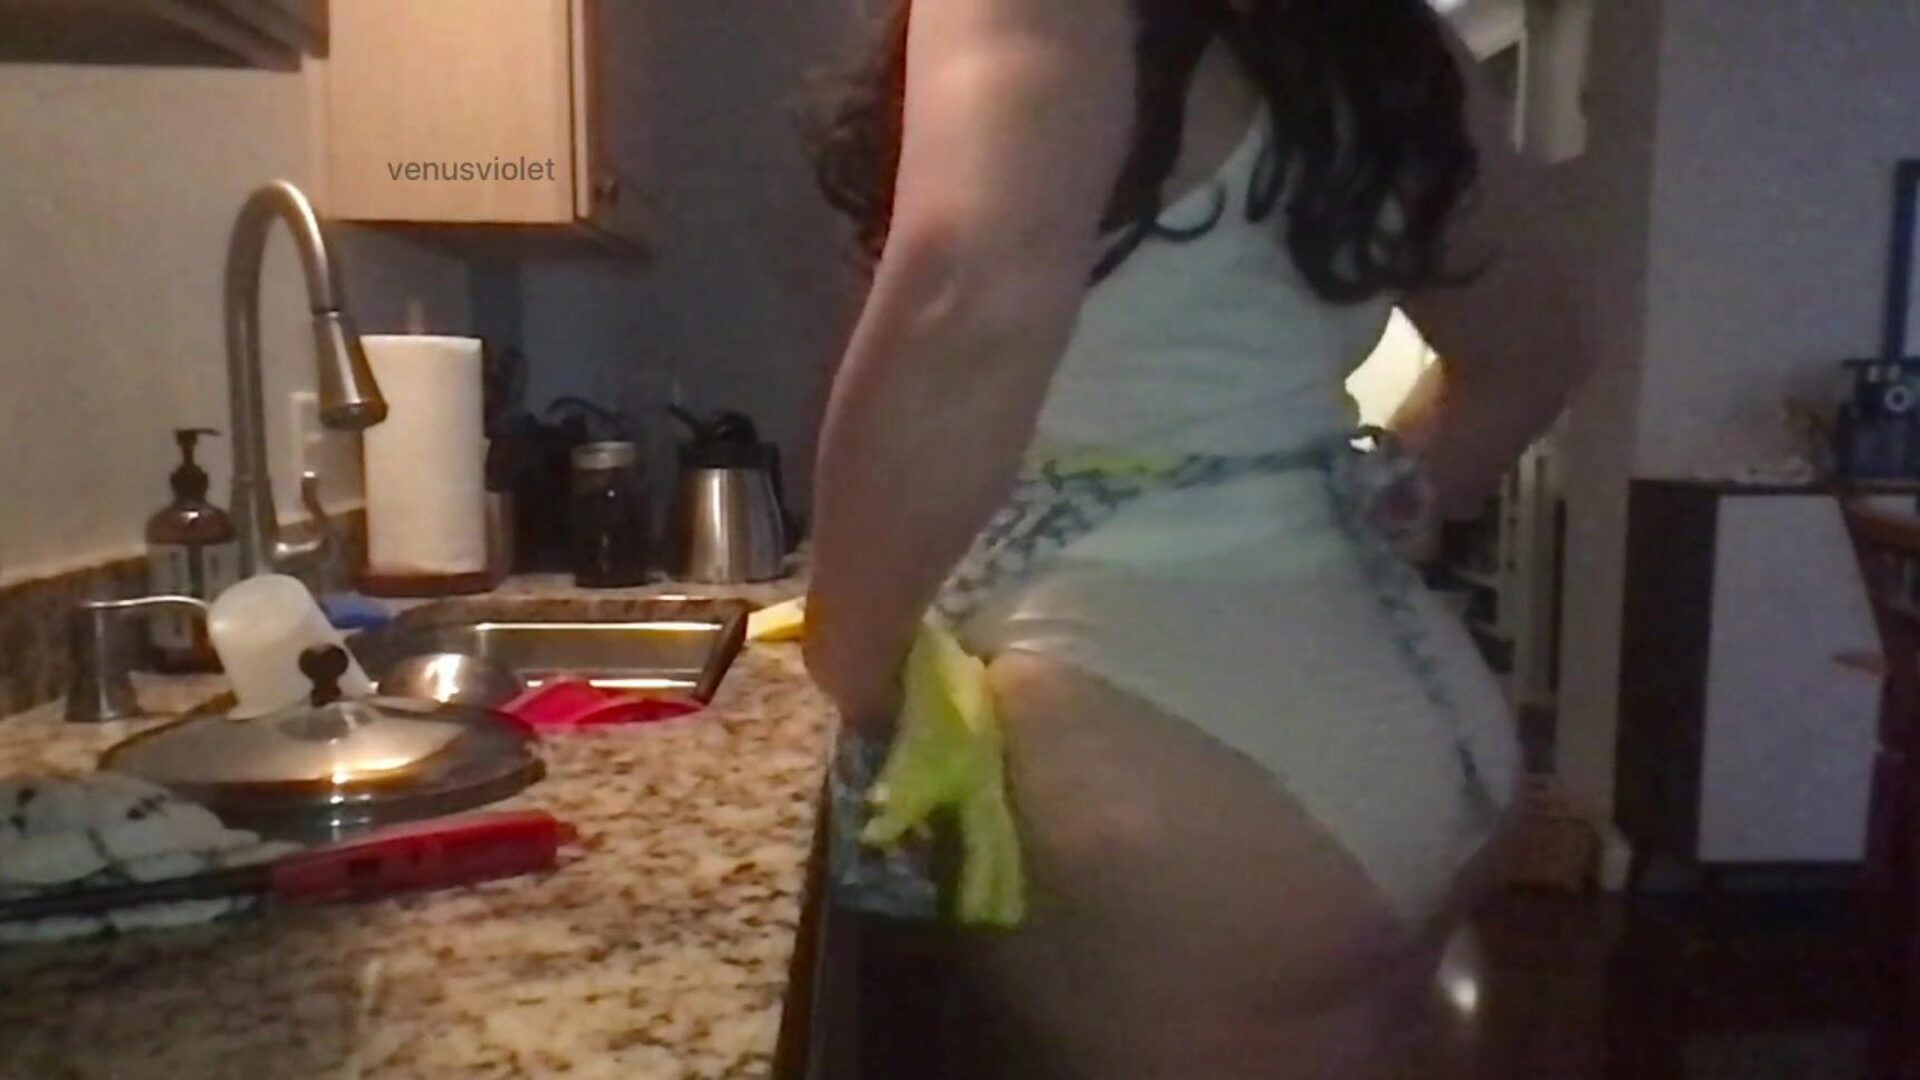 Milf POV: Thicc Step Mom Relentlessly Teases by Showing Off Her Fat Ass Aug 30th 2021